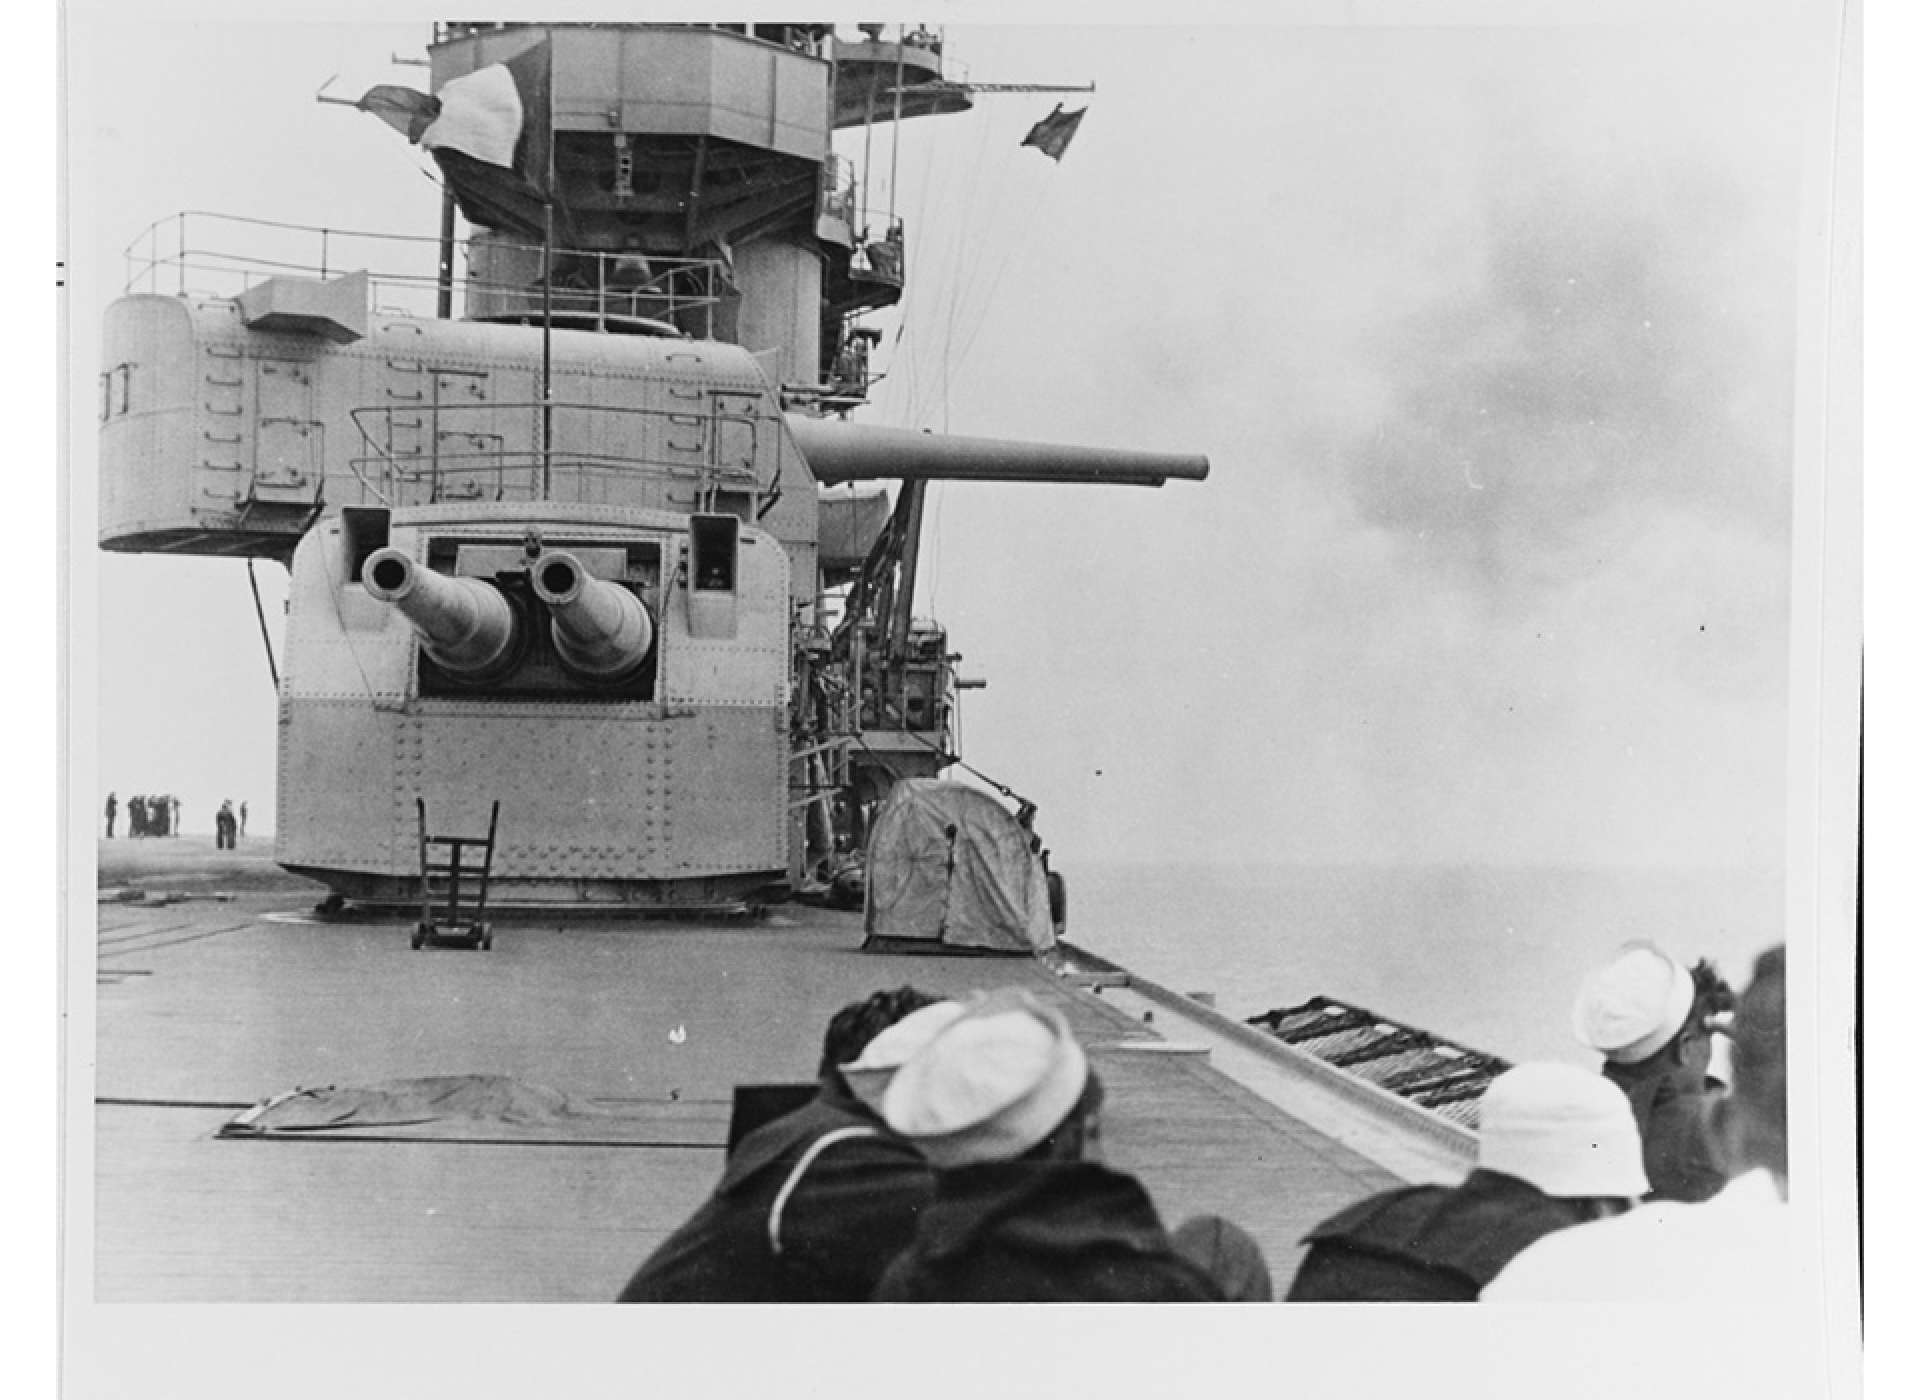 view of the USS Lexington’s (CV-2) 8-inch gun turrets, seen in the 1920s